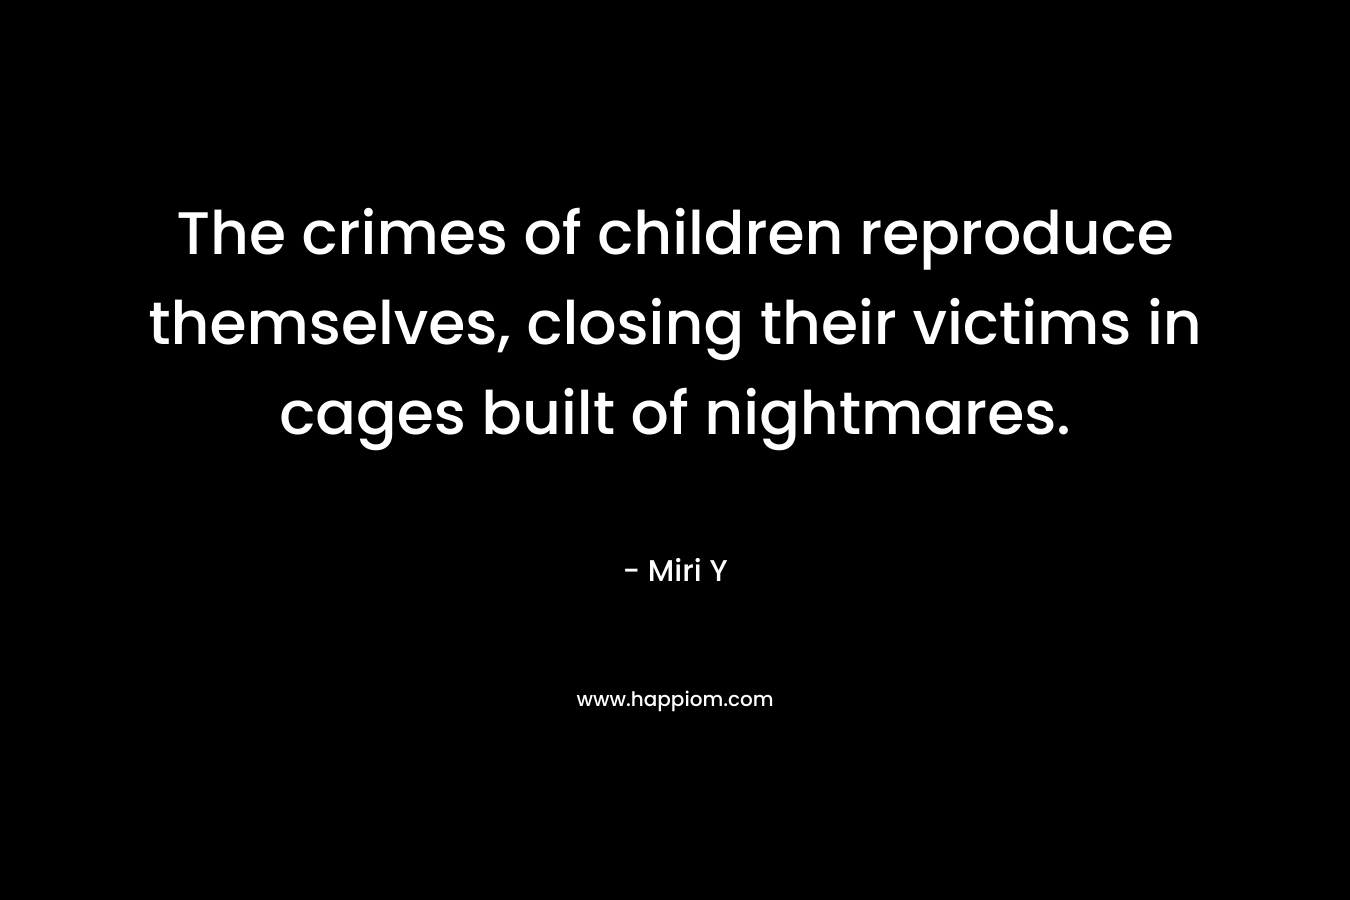 The crimes of children reproduce themselves, closing their victims in cages built of nightmares. – Miri Y